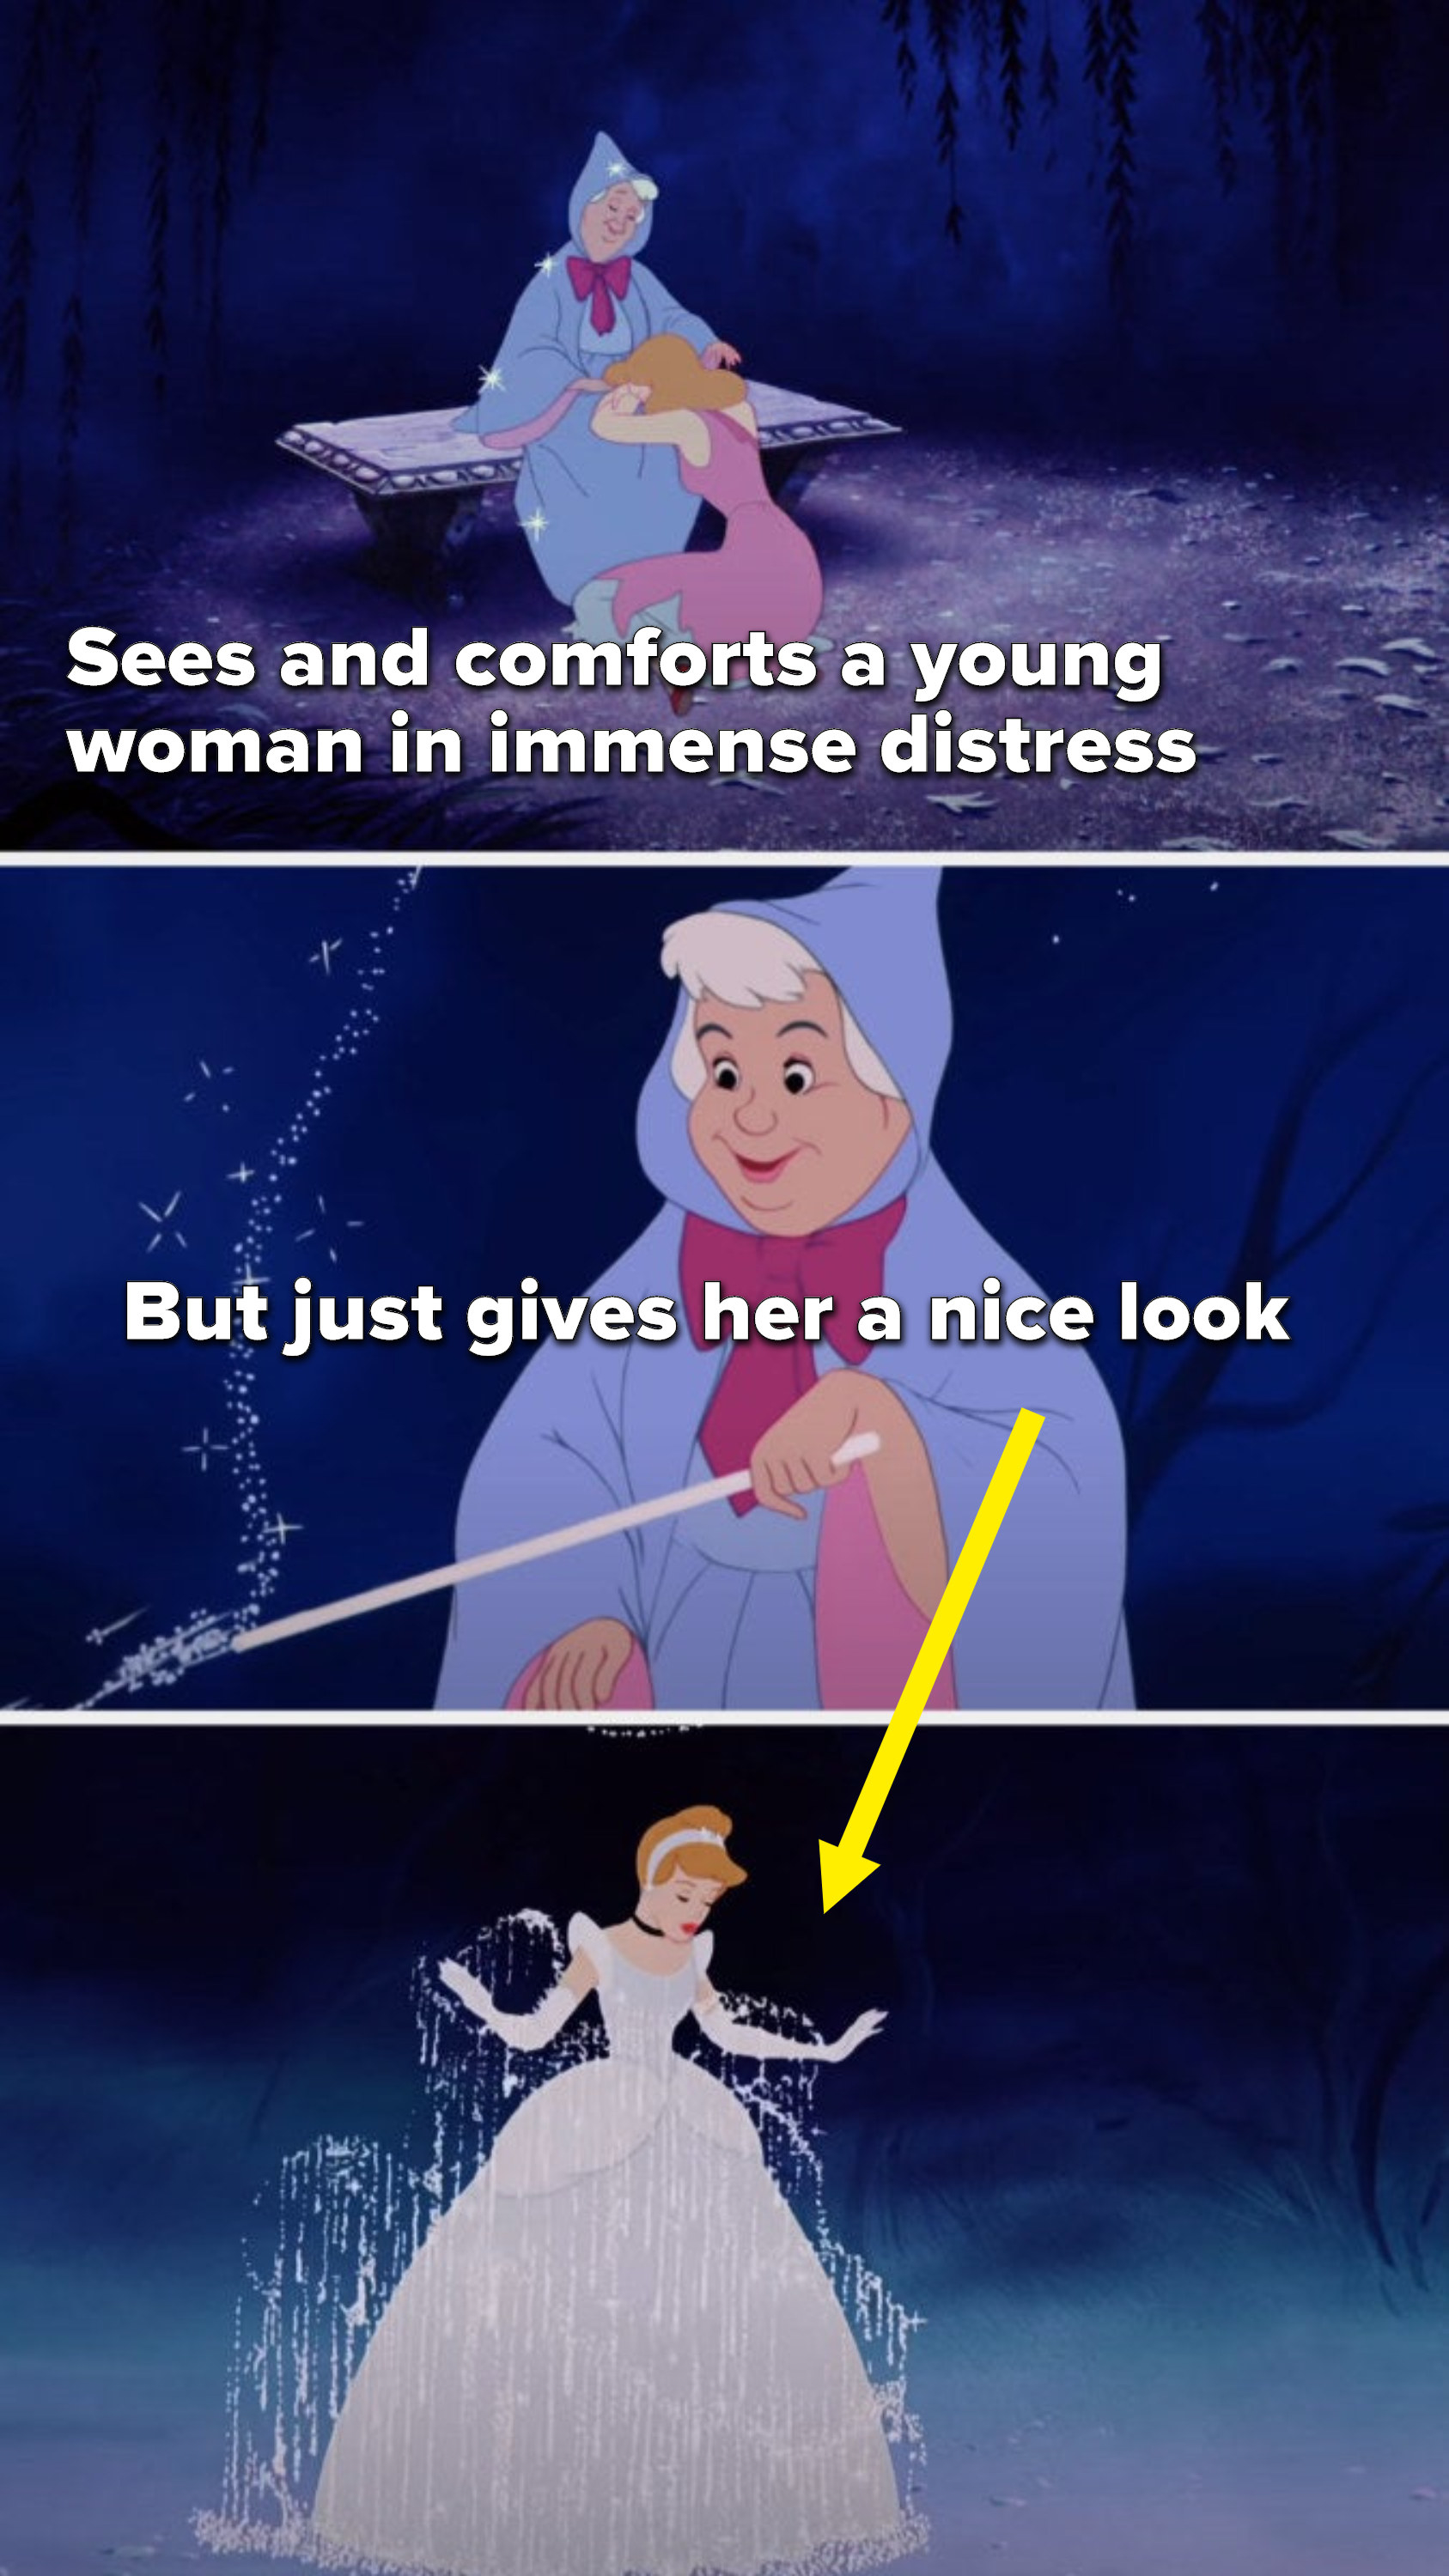 The fairy godmother comforts a crying, immensely distressed Cinderella and but just giver her a nice look